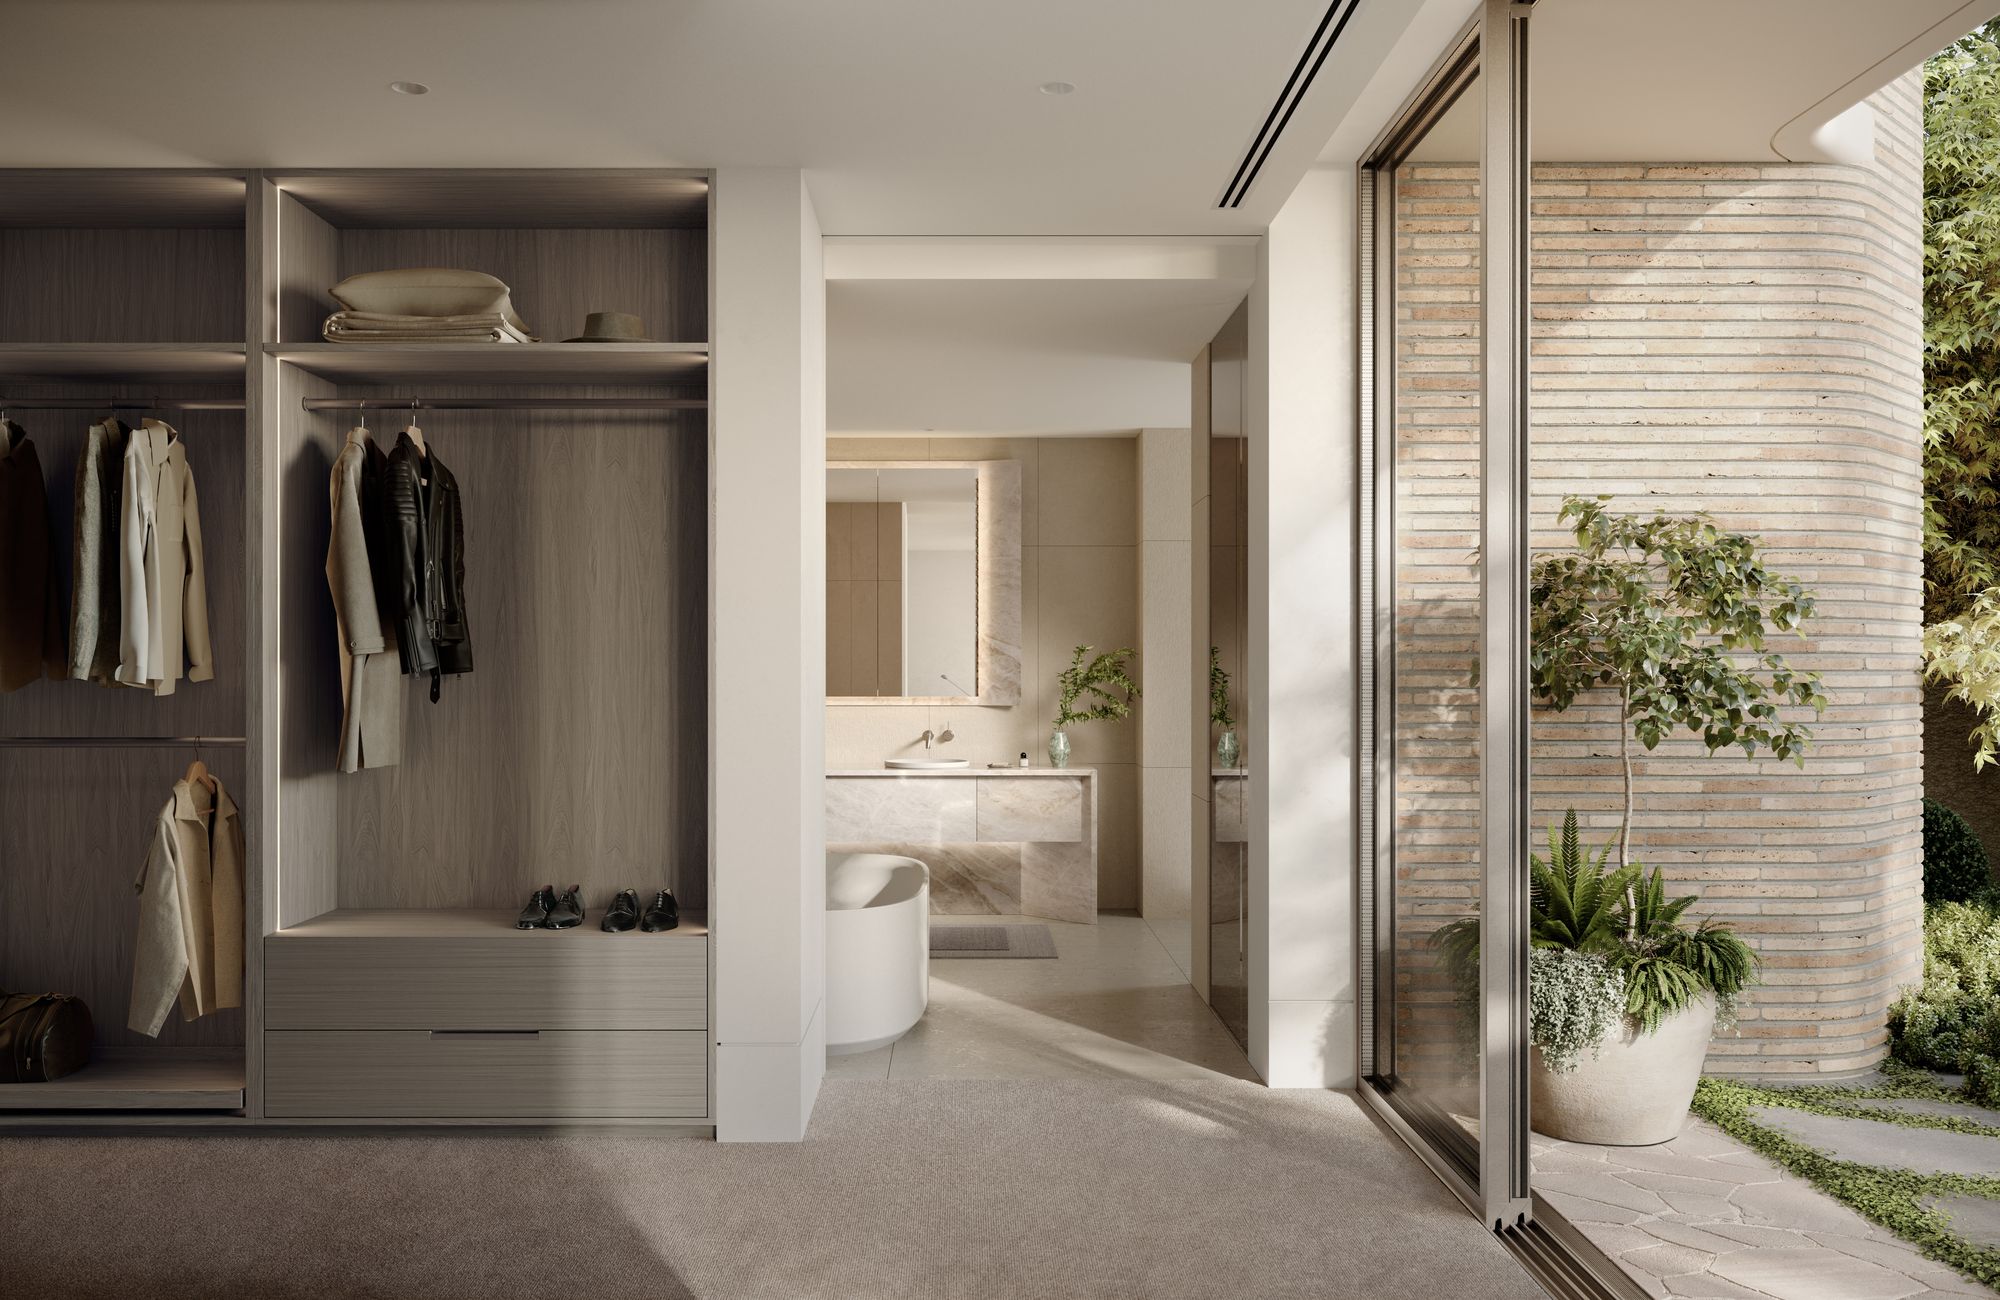 Como Toorak by Prime Edition x Jolson.The image displays an elegant interior space that seamlessly connects to an outdoor garden through large sliding glass doors. On the left, a built-in wardrobe with wood textures showcases neatly arranged clothing and accessories, exemplifying a clean and minimalist design. The view through the doorway reveals a sophisticated bathroom with a neutral color palette, enhancing the calm and luxurious atmosphere. Natural light floods the interior, blurring the lines between inside and outside, while the lush greenery visible through the glass adds a touch of nature to the urban home setting.